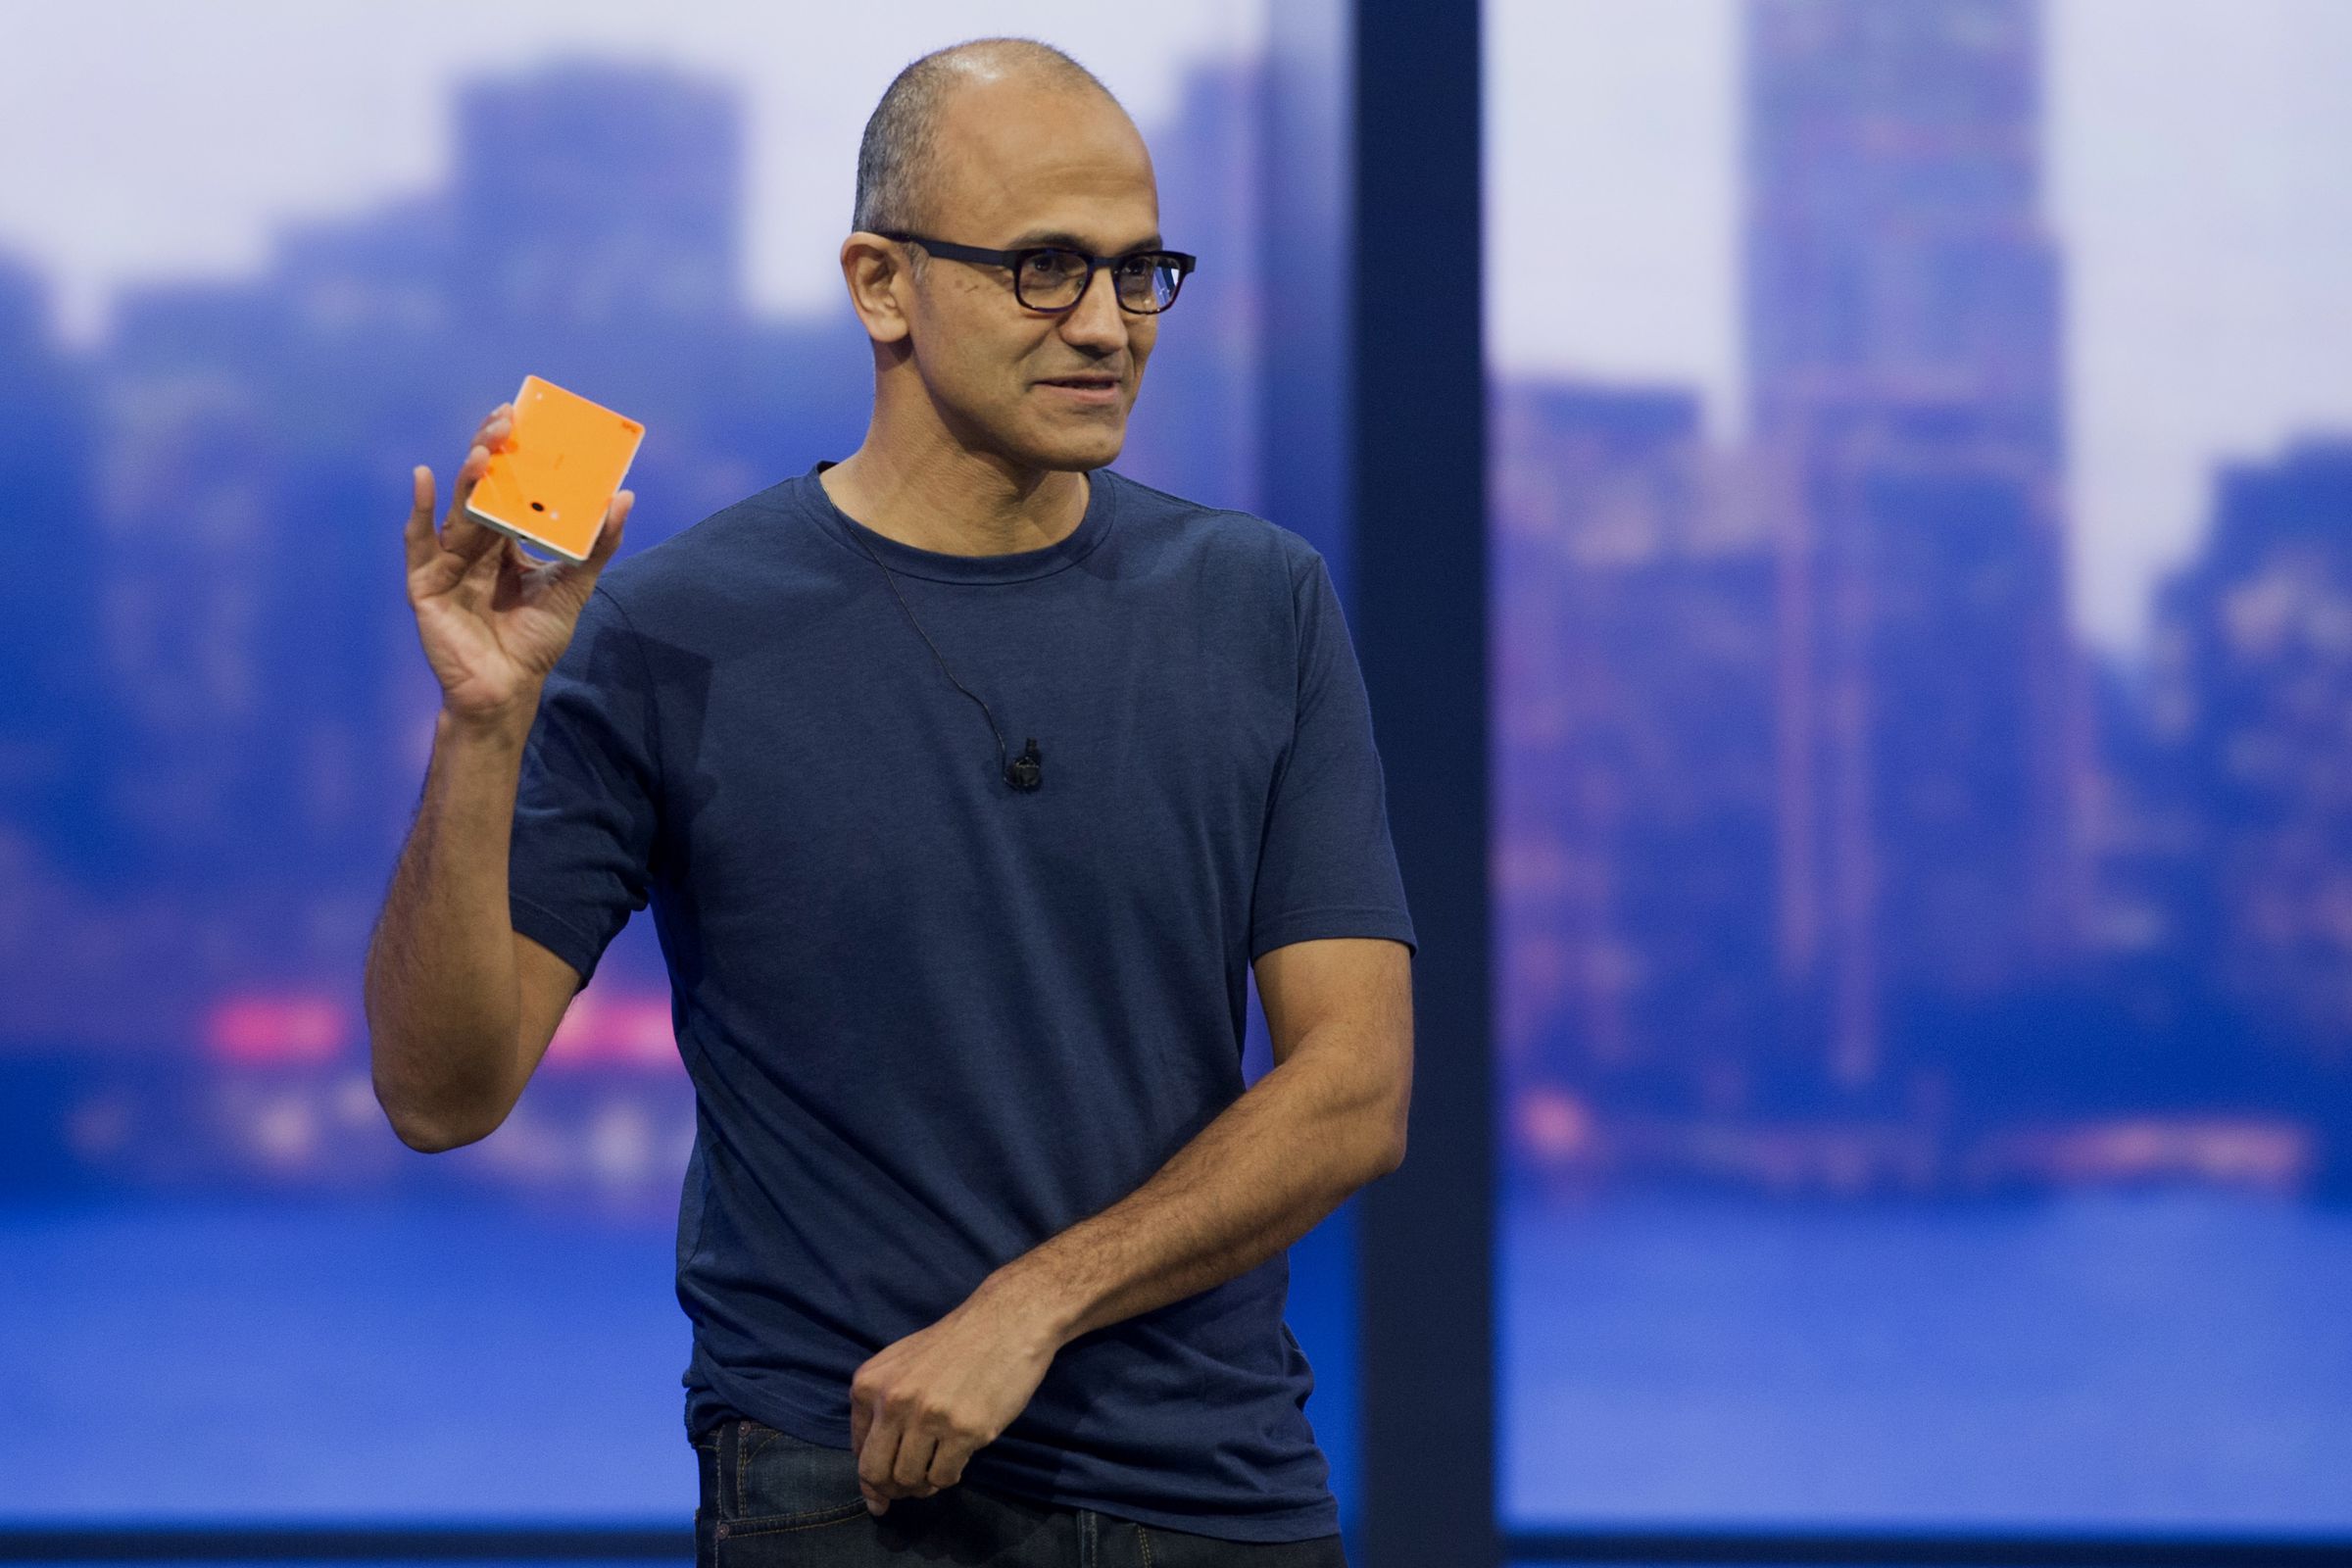 Microsoft CEO Satya Nadella on stage at Build in 2014